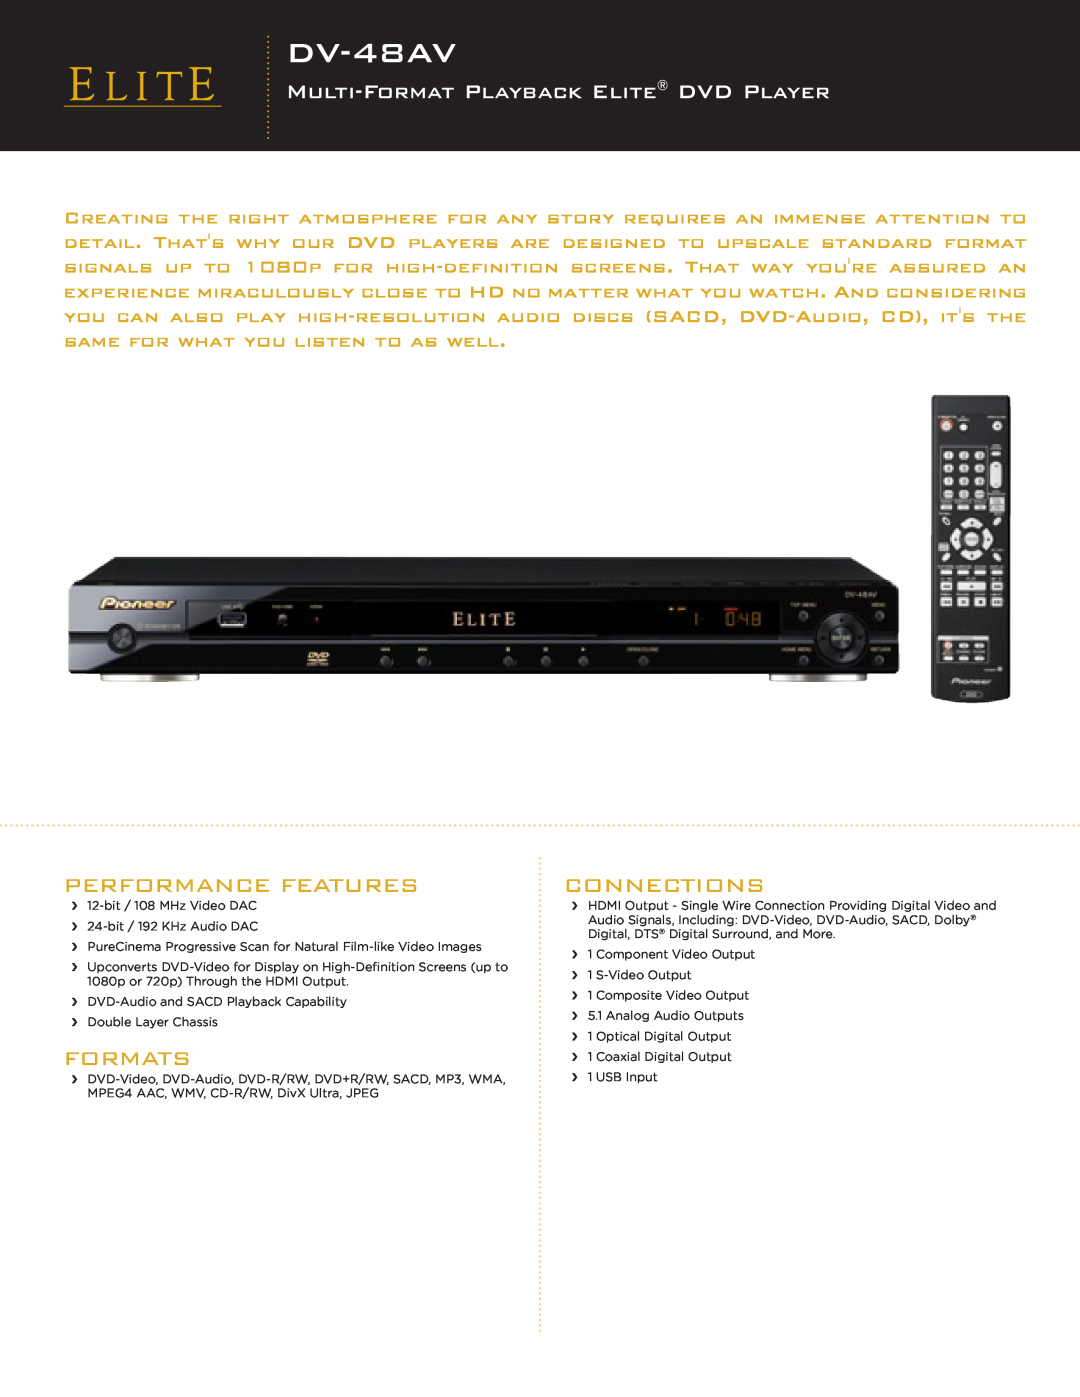 Elite DV-48AV manual Multi-Format Playback Elite Dvd Player, Performance Features, Formats, Connections 